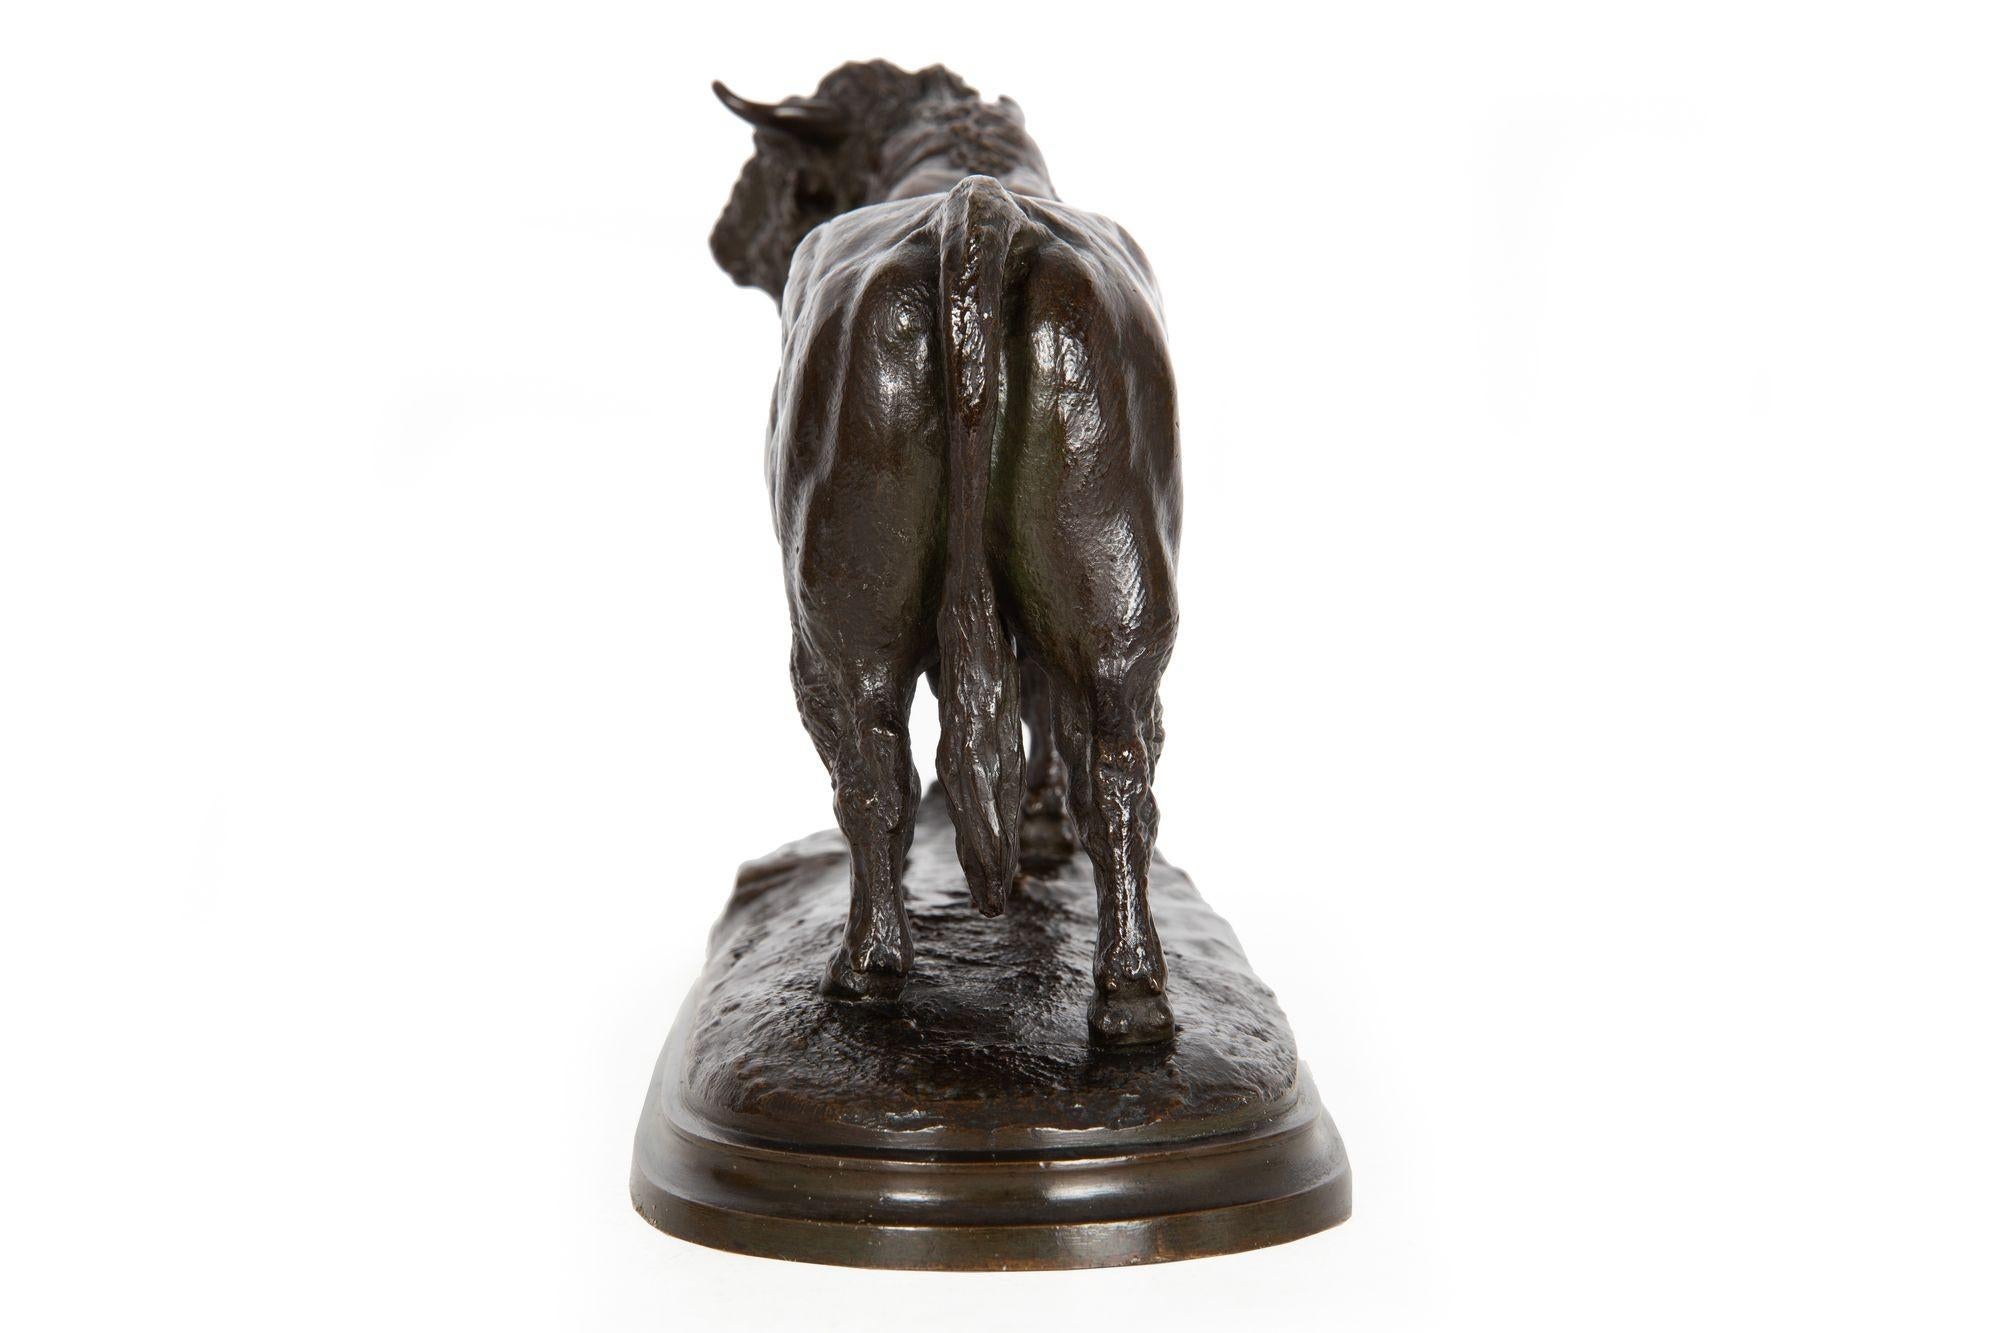 French, Antique Bronze Sculpture of Aberdeen Angus Bull by Isidore Bonheur In Good Condition For Sale In Shippensburg, PA